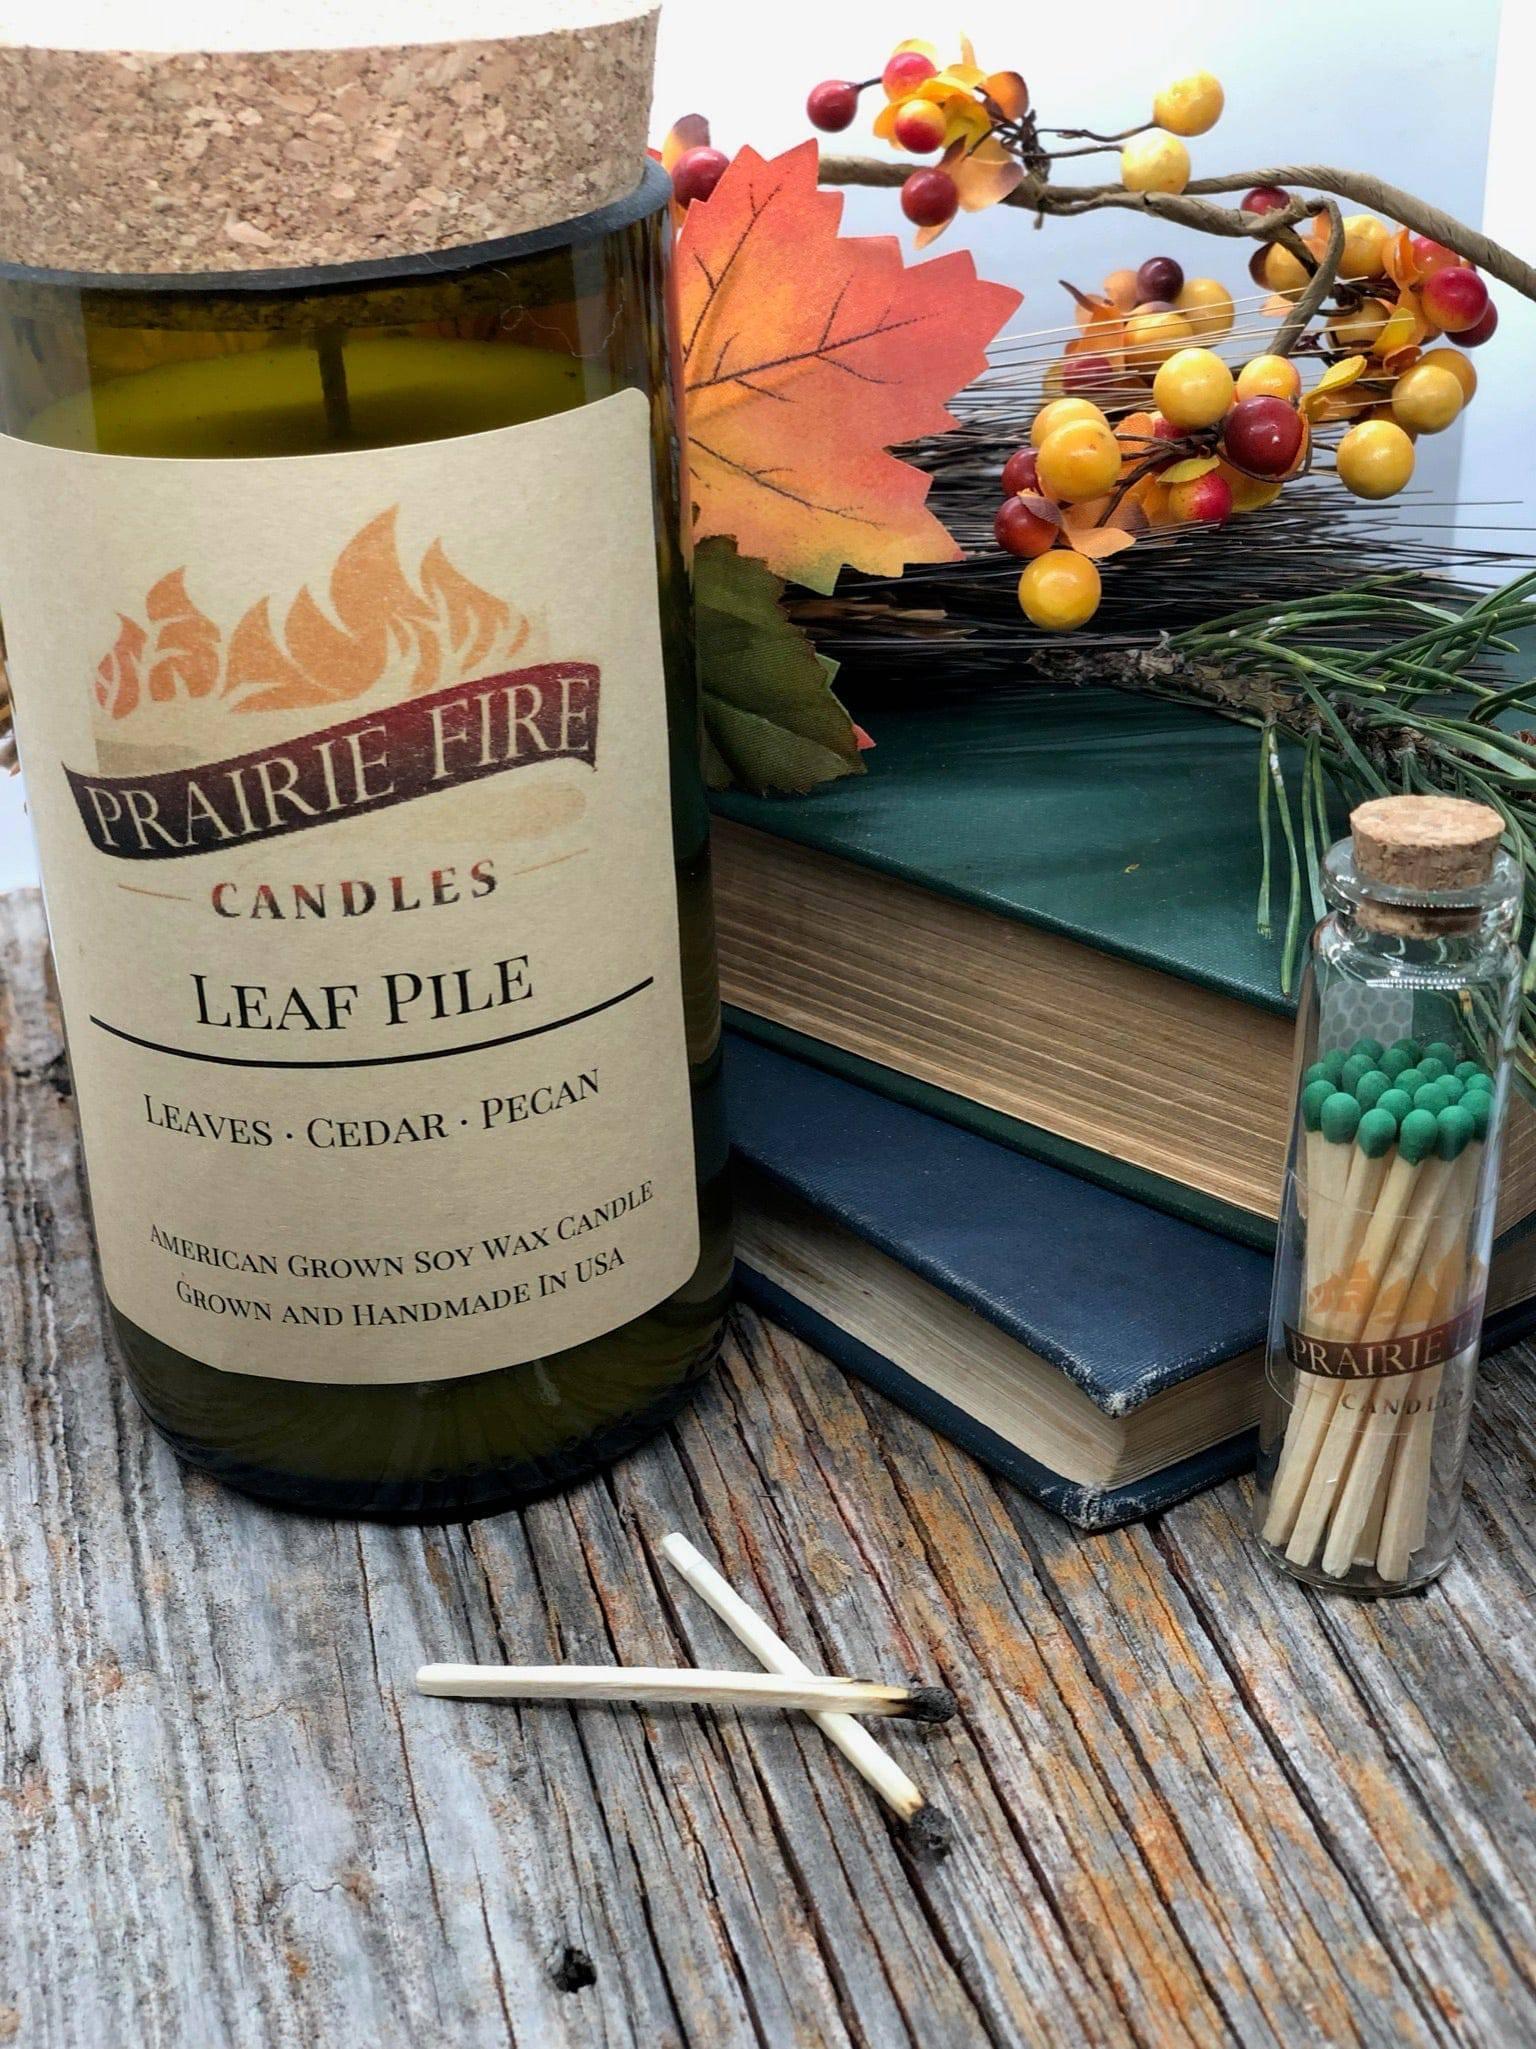 Leaf Pile Soy Wax Candle | Repurposed Wine Bottle Candle Natural Cork | Handmade in USA Candle | Eco-Friendly Candle | Non-Toxic Soy Candle - Prairie Fire Candles